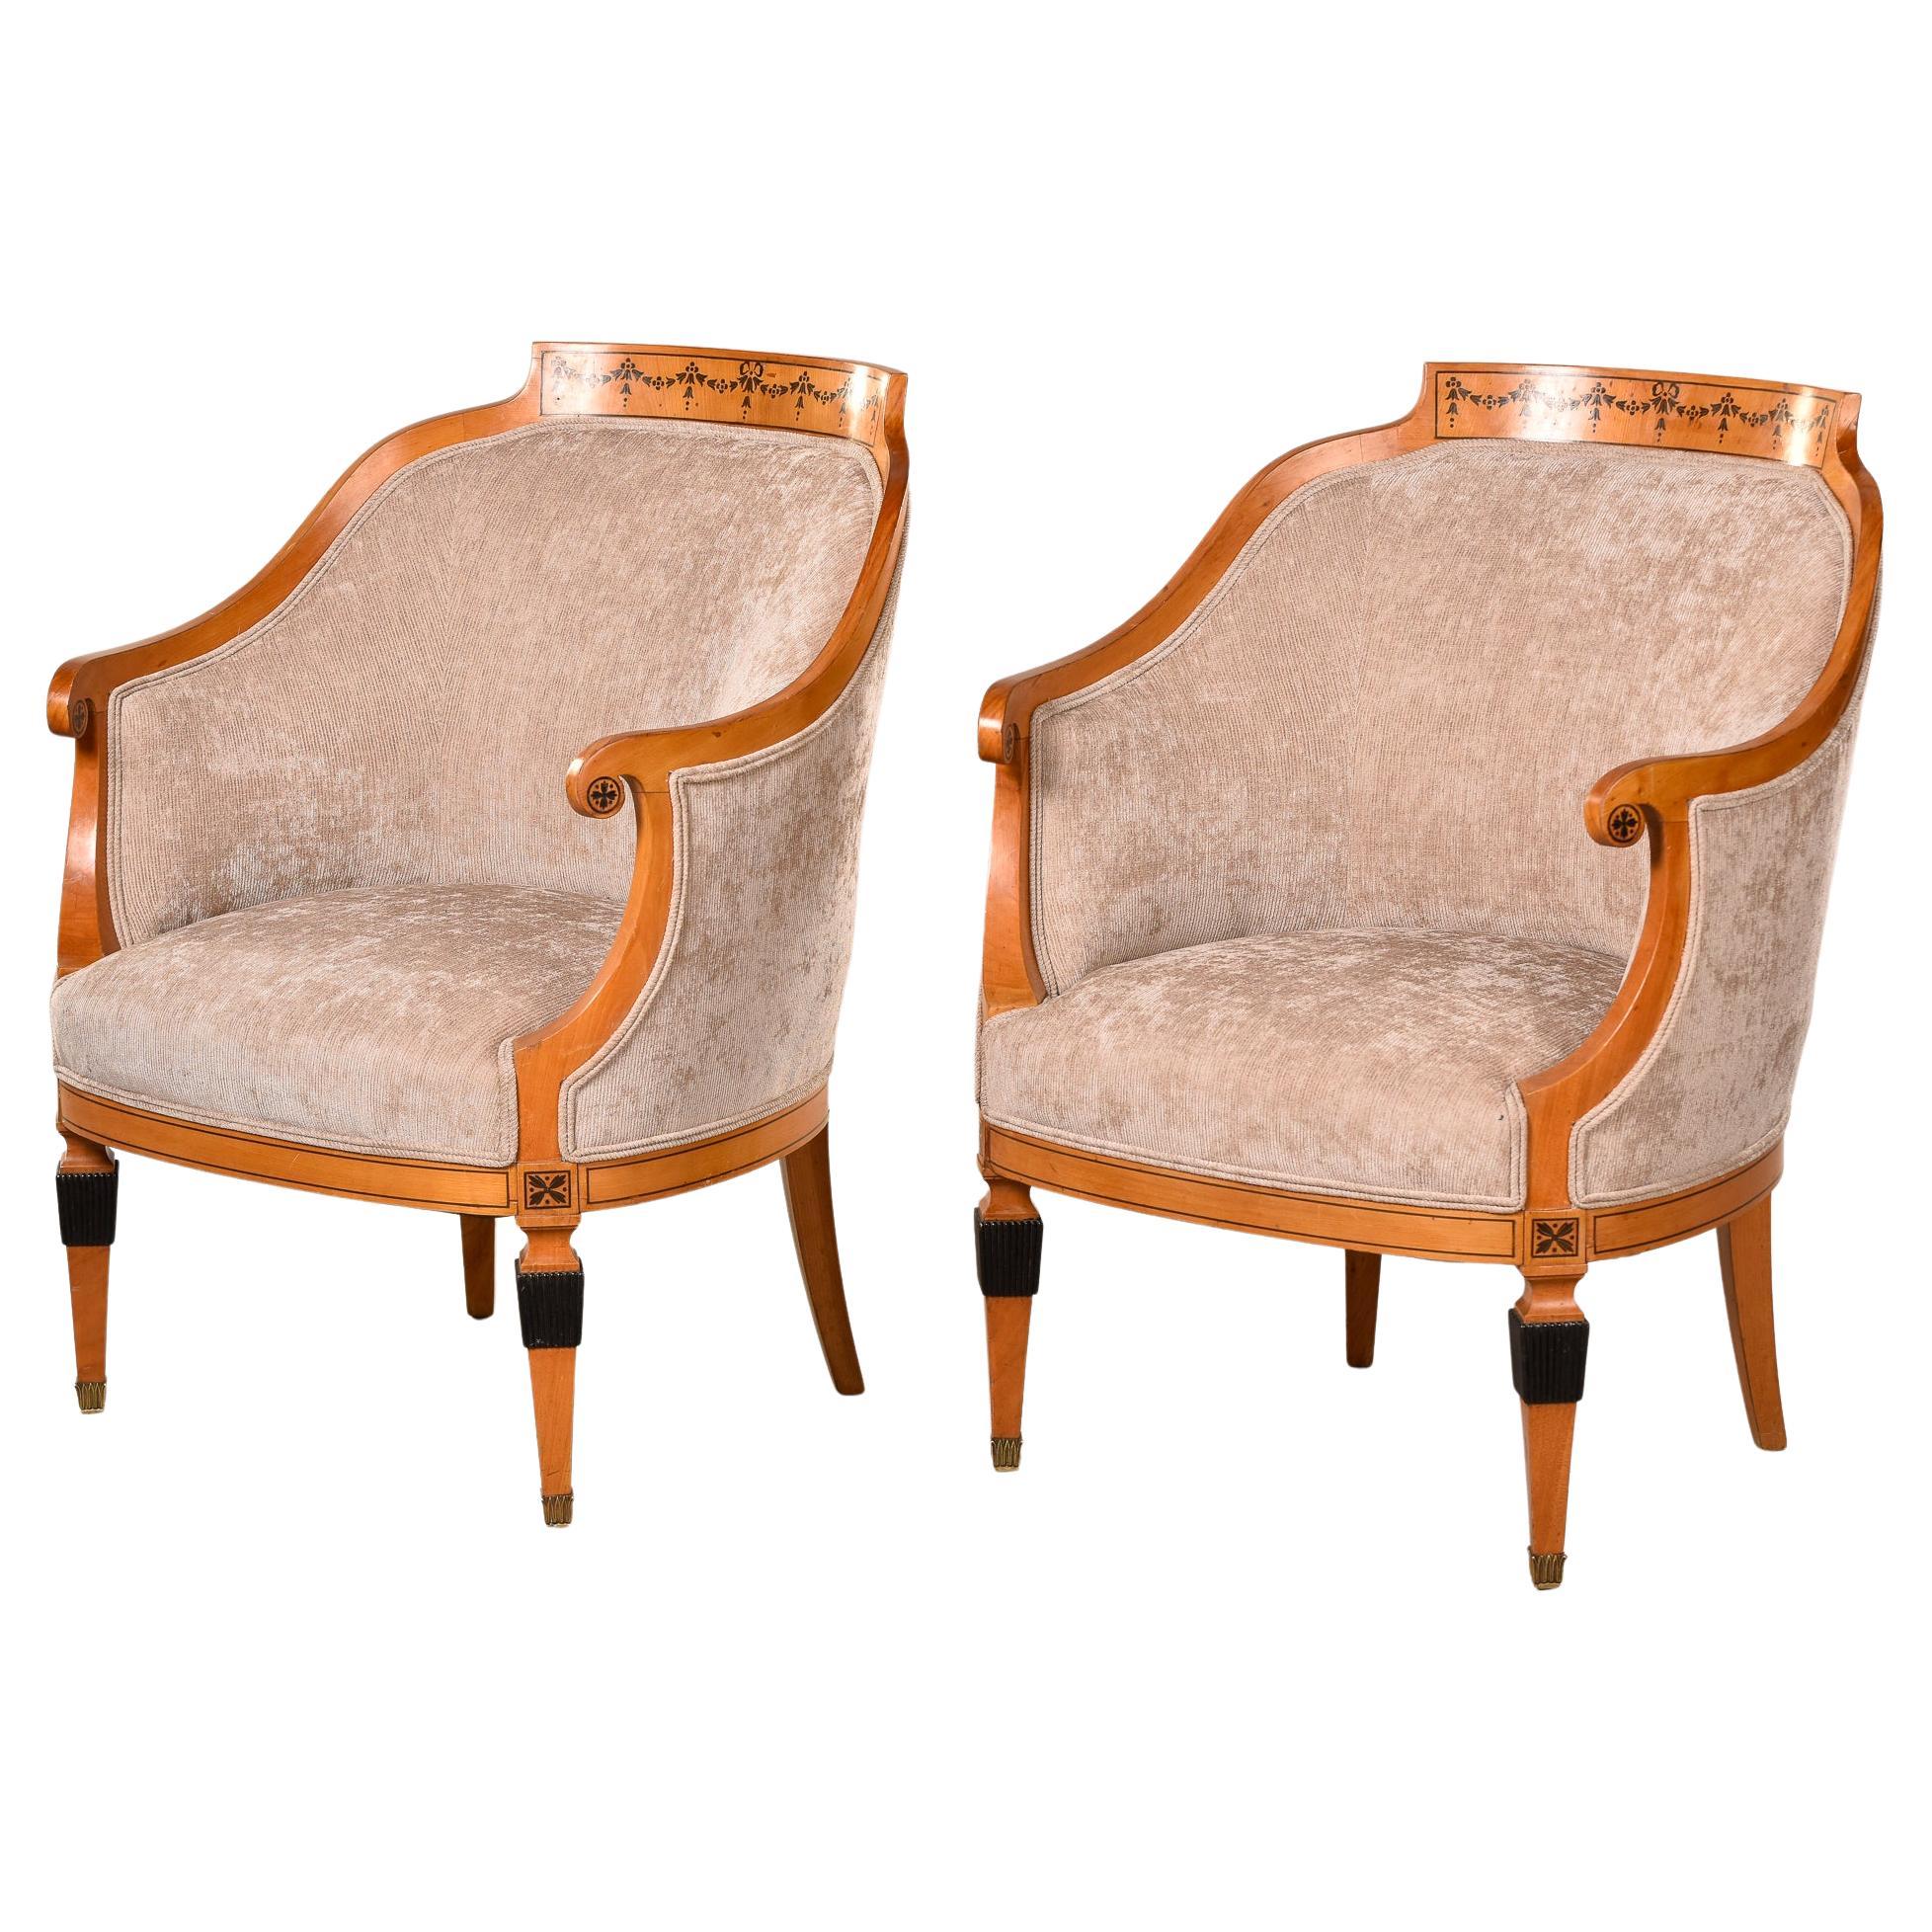 Pair 1930s French Bergeres with New Upholstery and Black Painted Details